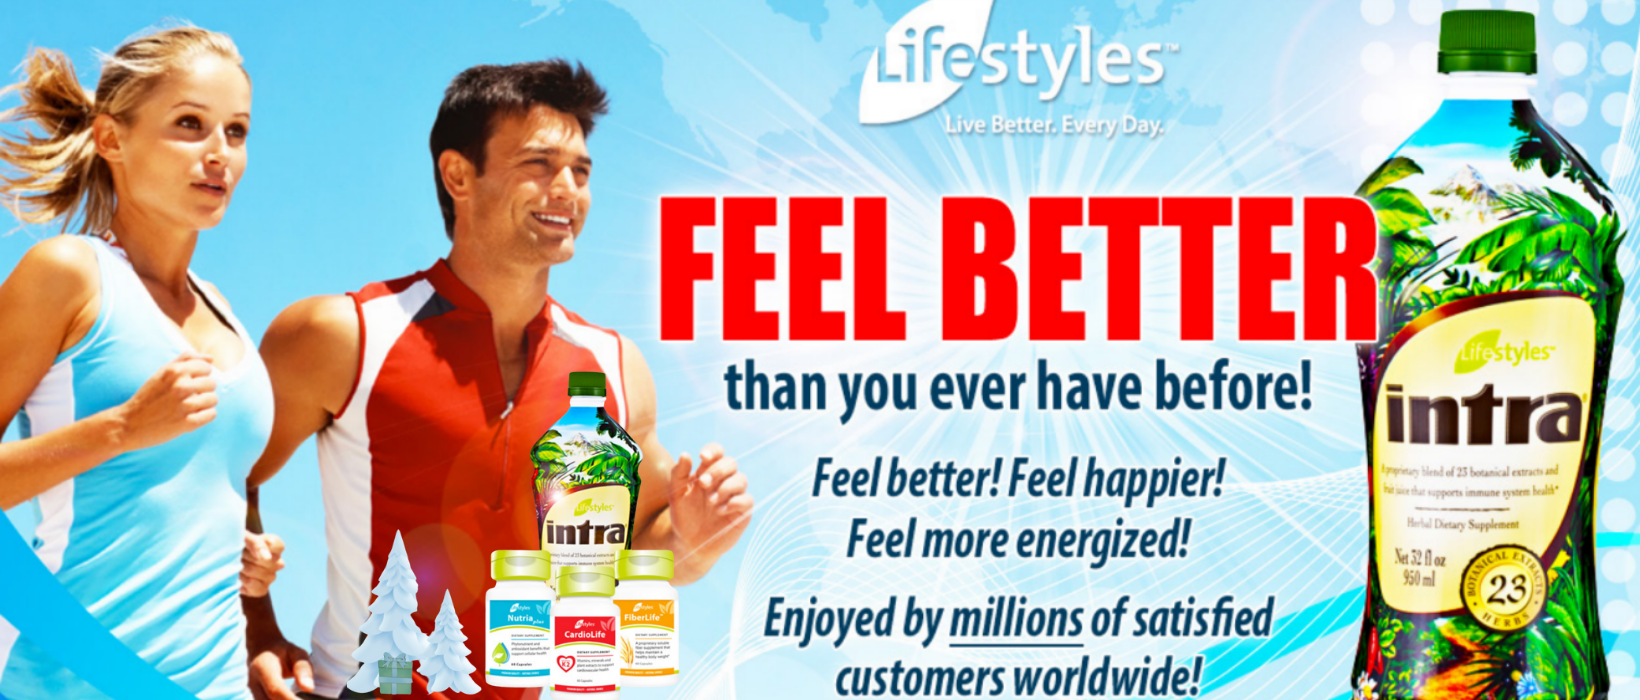 Man & Woman exercise together to stay healthy and fit using lifestyles products